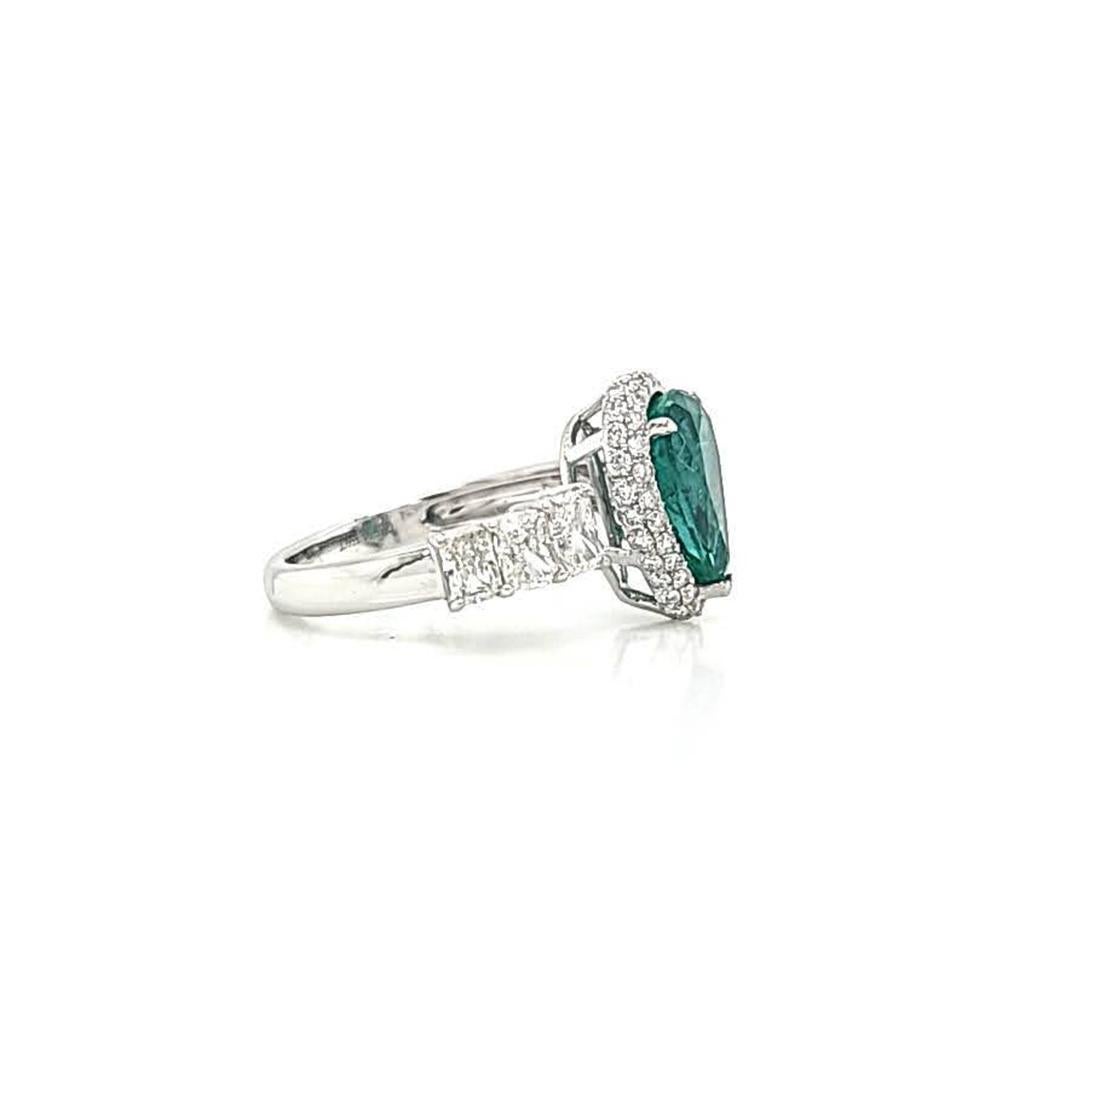 2.67 CT Zambian Emerald & 1.10 CT Diamonds in 14K White Gold Engagement Ring For Sale 1